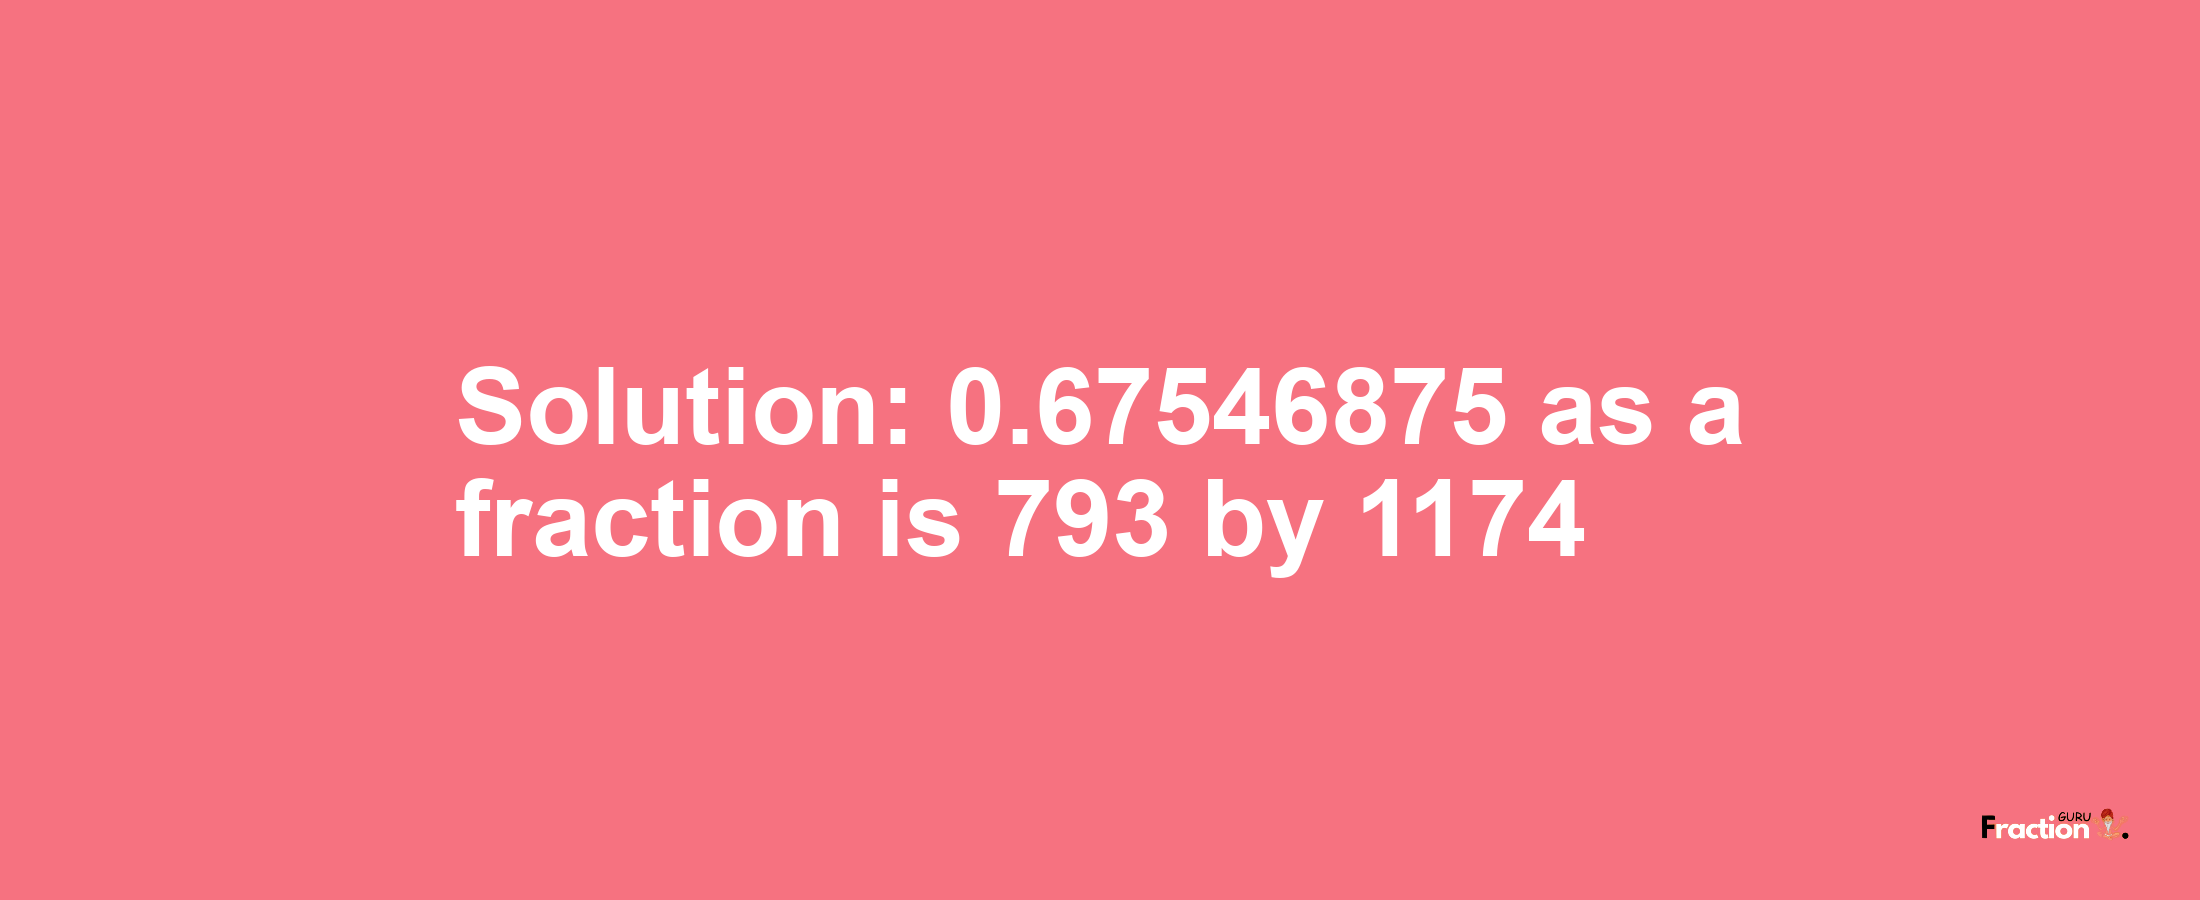 Solution:0.67546875 as a fraction is 793/1174